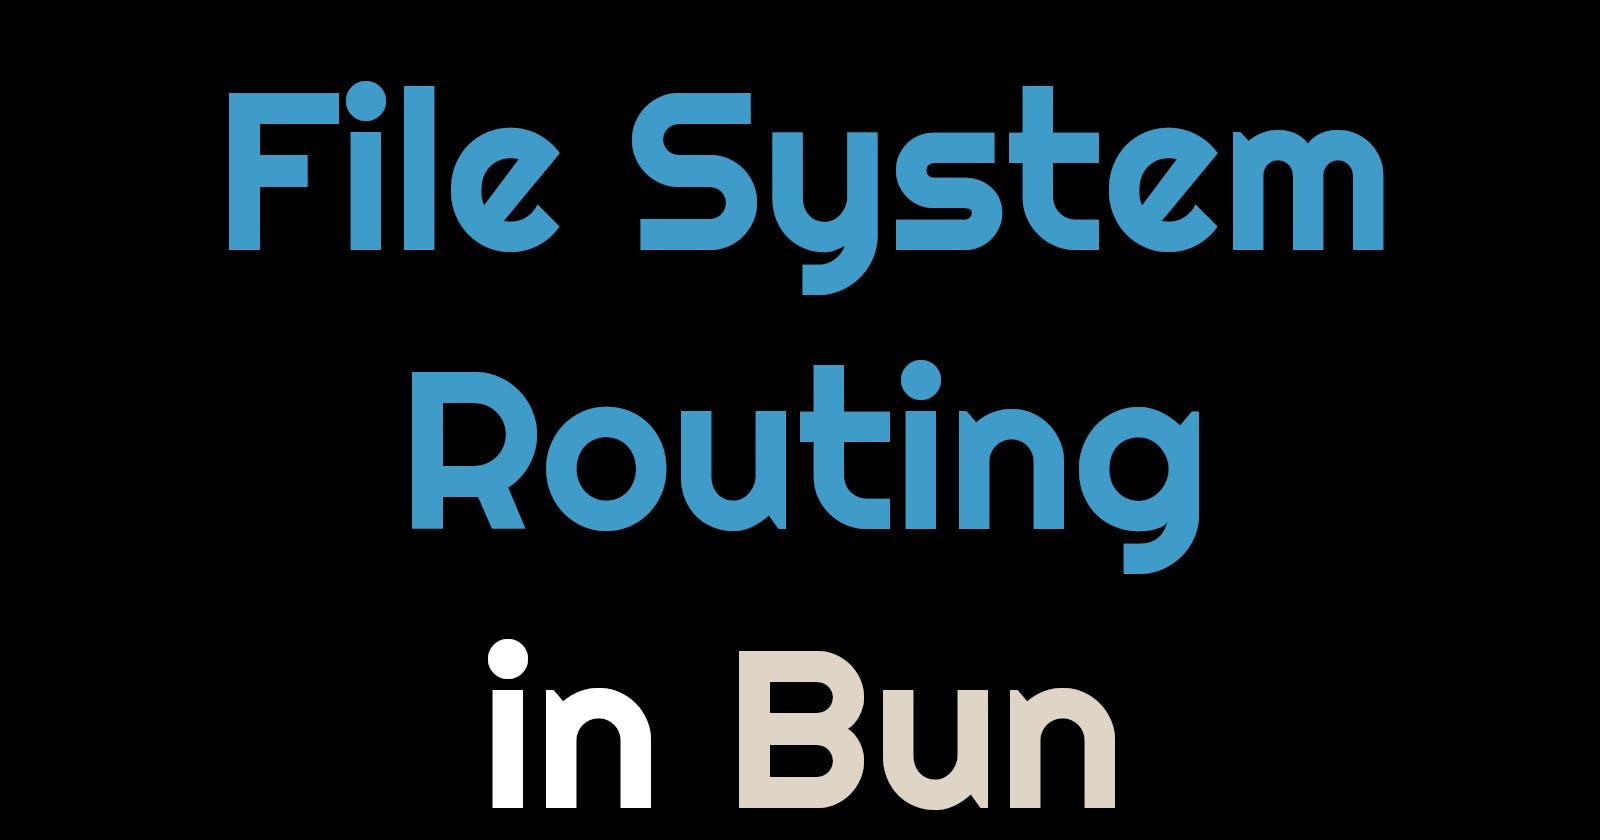 Creating file system routing in Bun